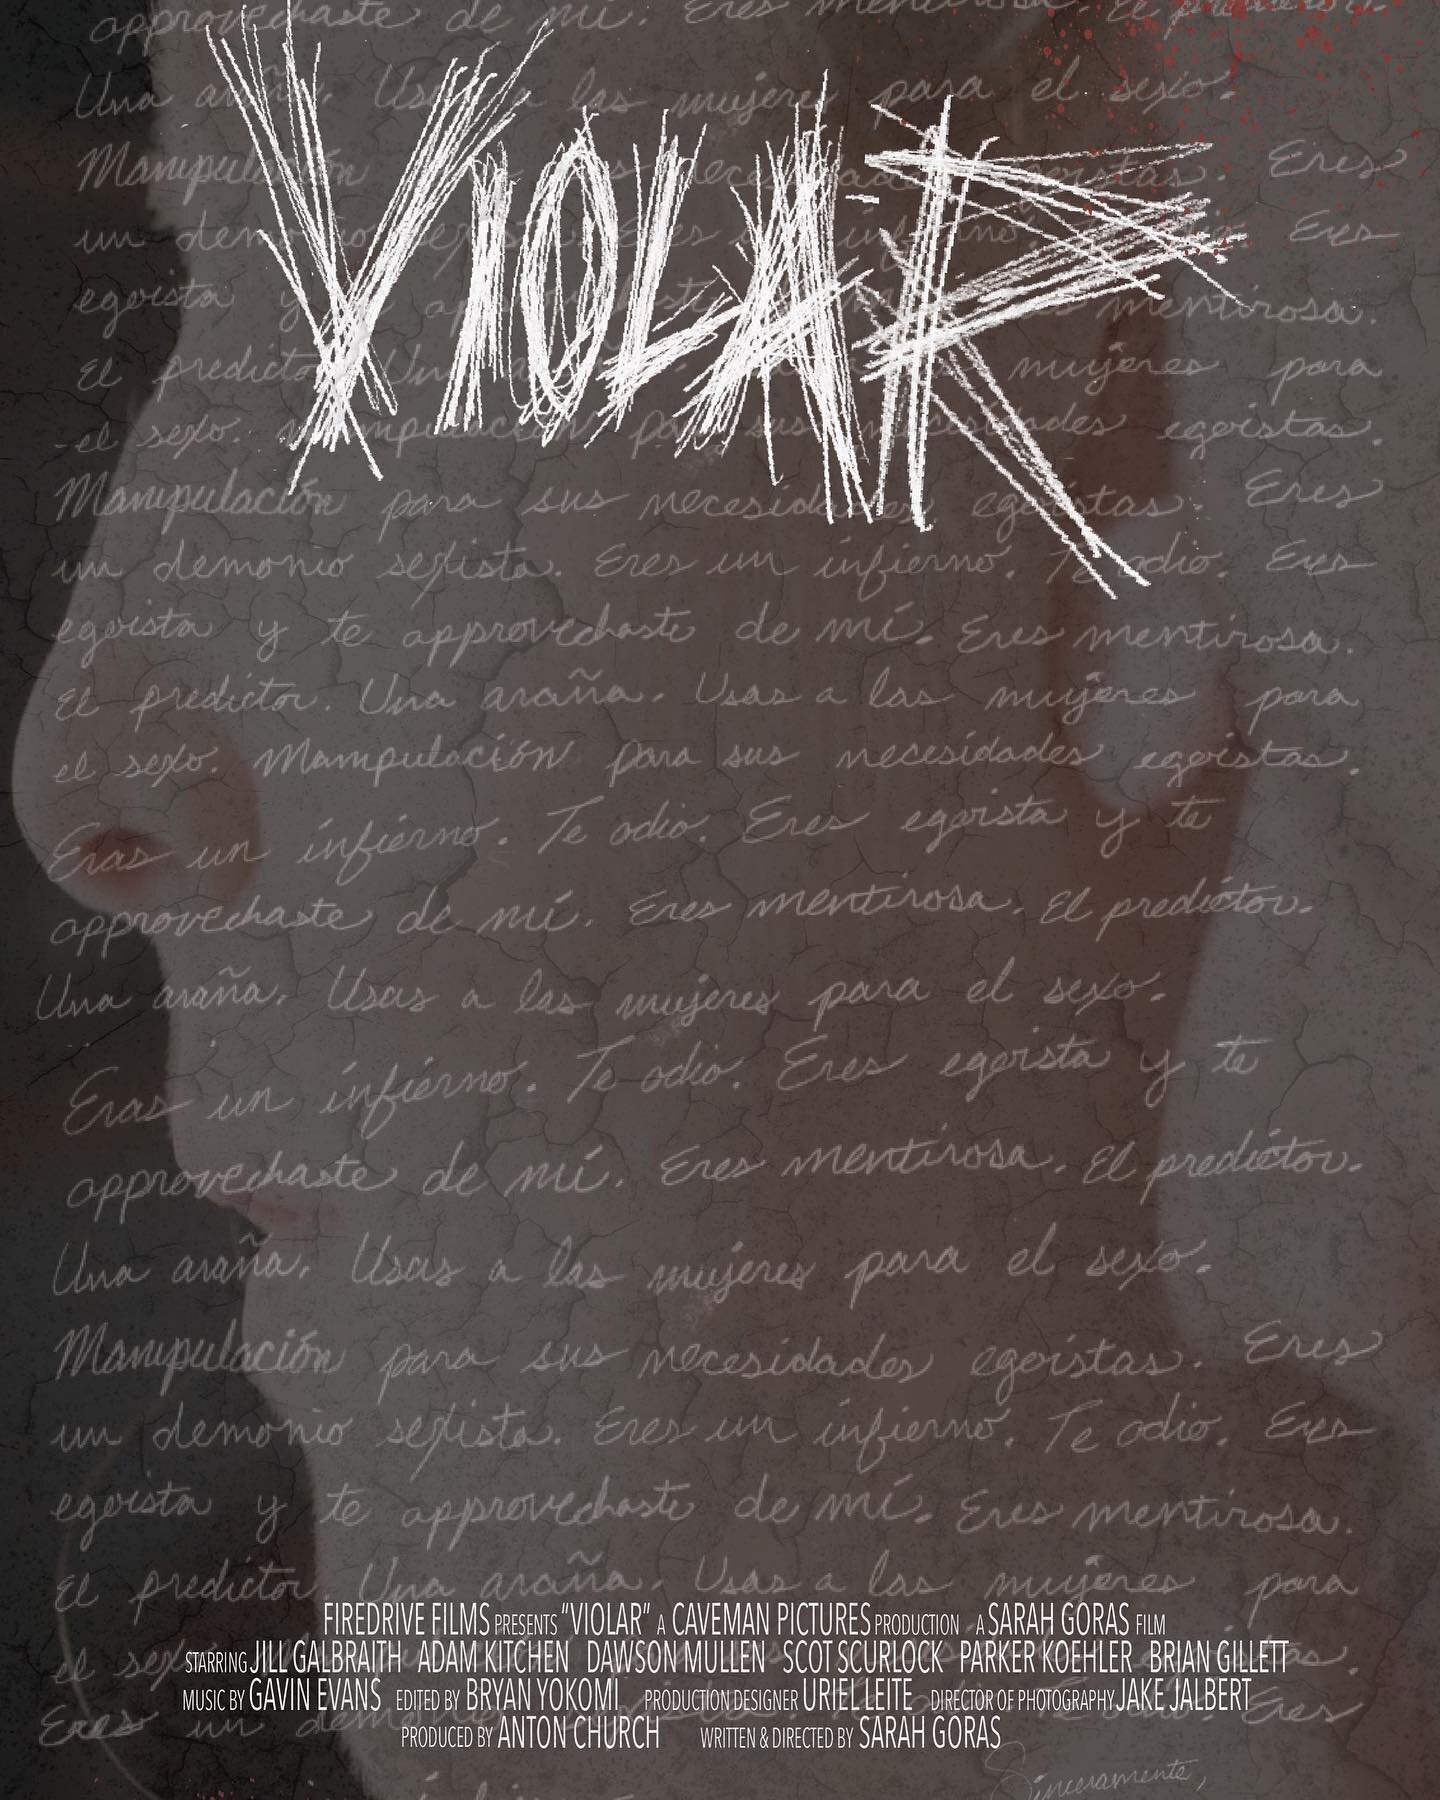 Renamed my film one more time.  A title is SO important.  The horror short film has changed from &ldquo;Woman in the Wood&rdquo; and is now proudly title &ldquo;VIOLAR&rdquo;. It ties so much to the theme and soul of the story.

@rollingrolling305 @j